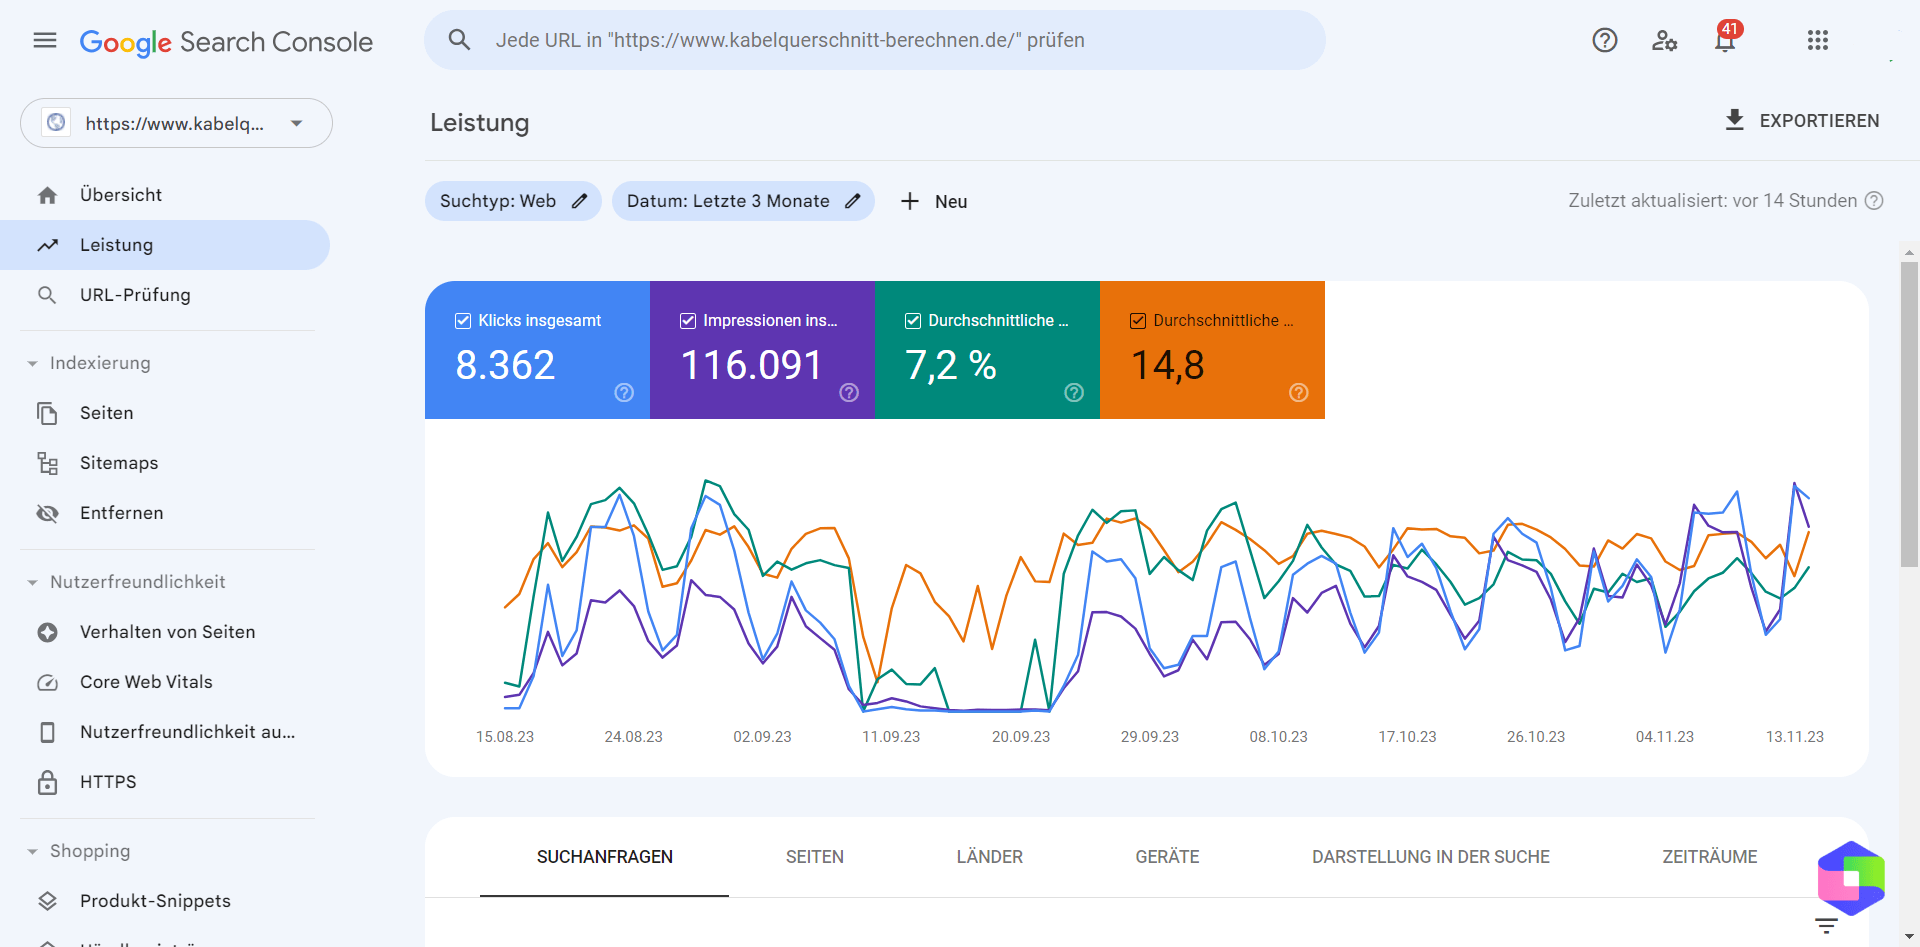 Die Google Search Console